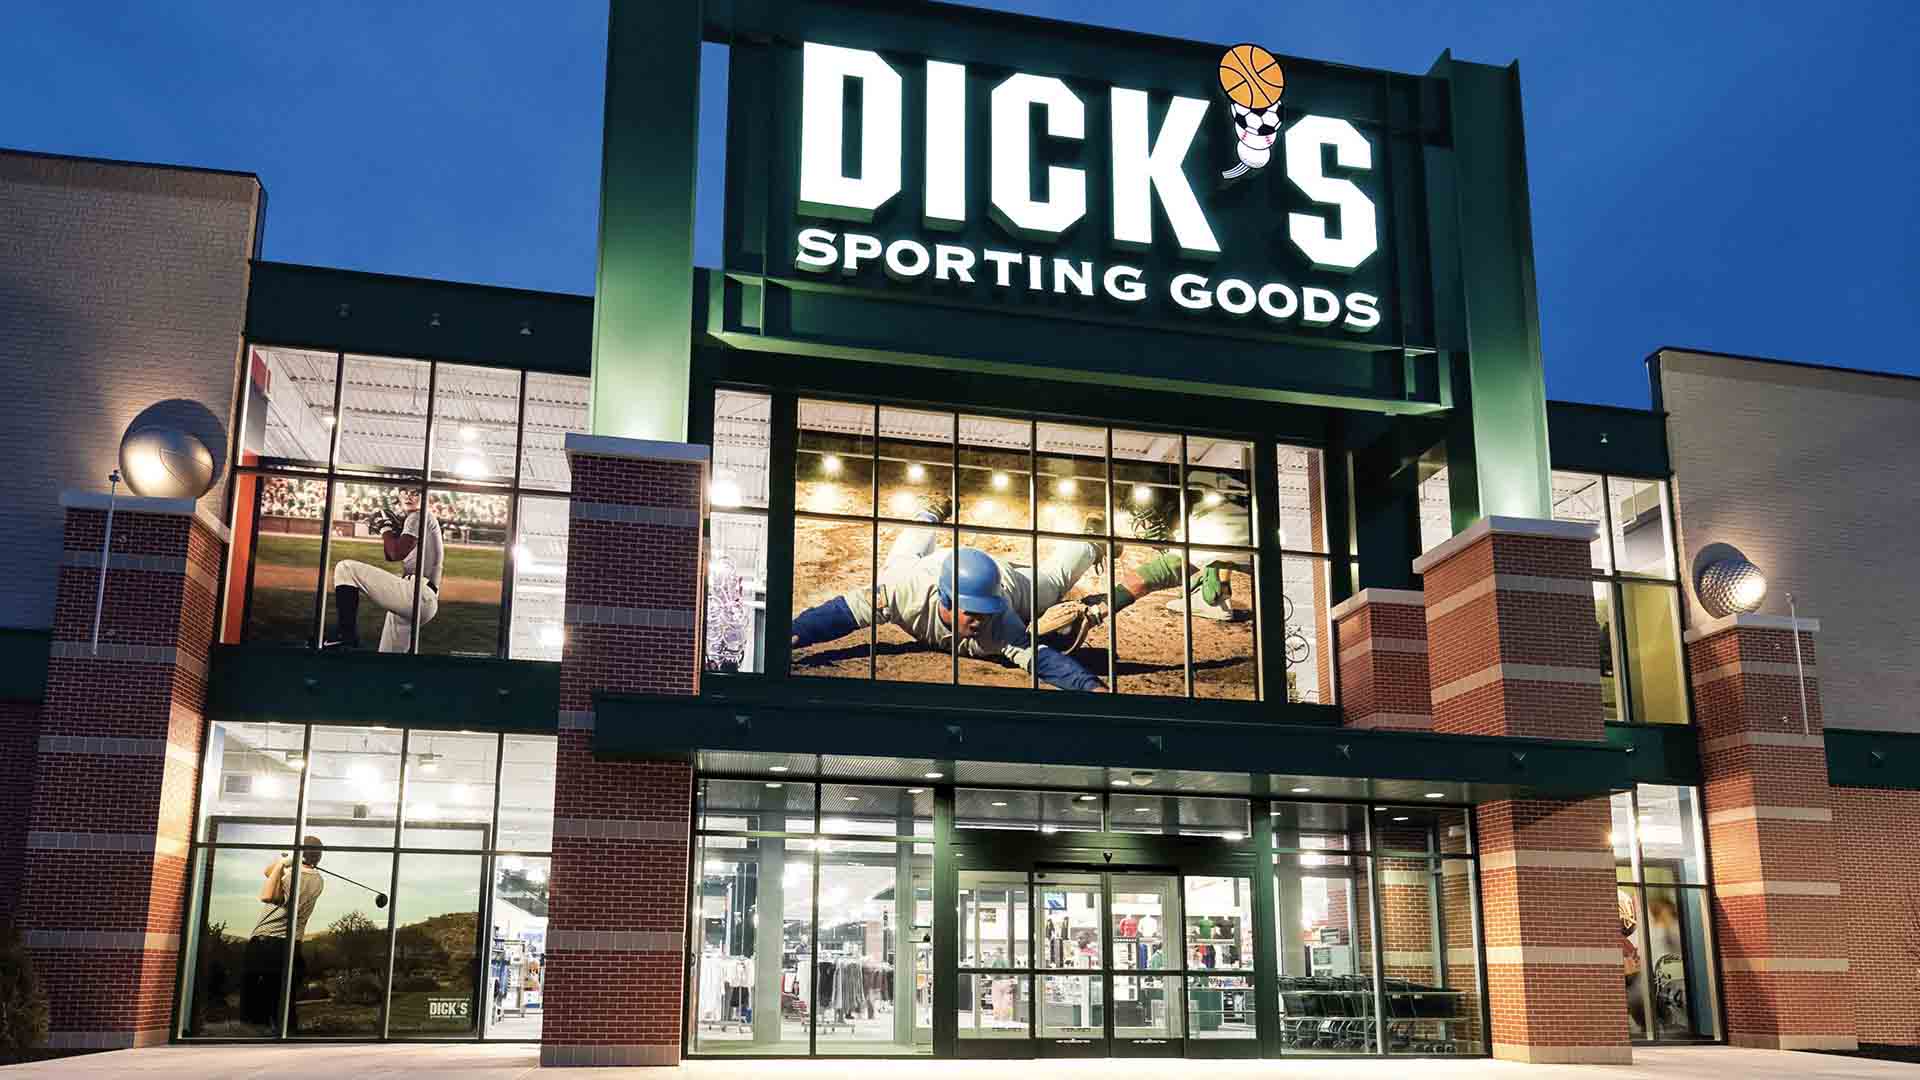 DICK'S Sporting Goods: Brick and Mortar's Contribution to Omnichannel Retail